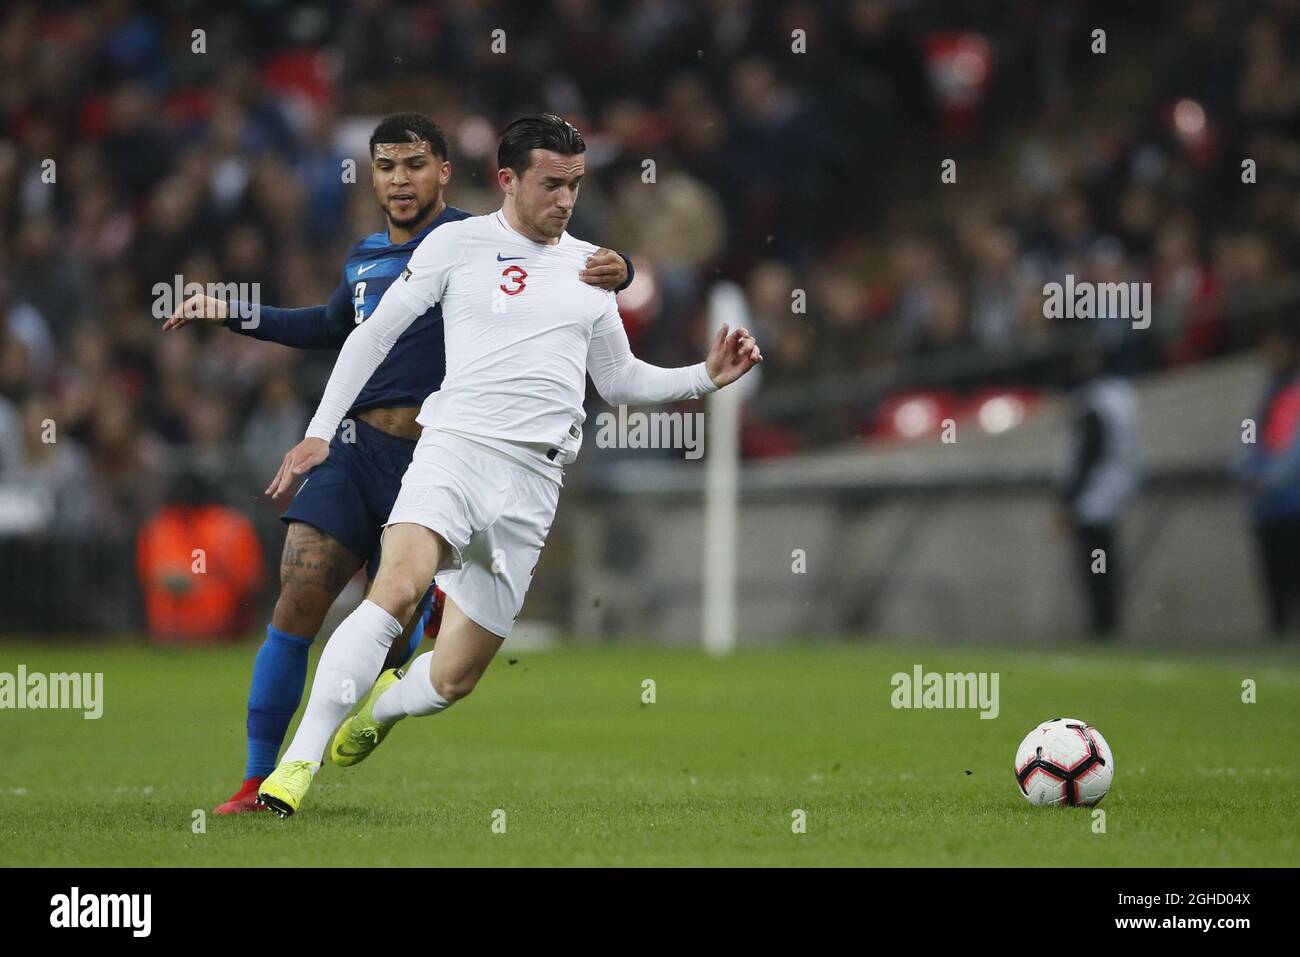 DeAndre Yedlin of USA tackles Ben Chilwell of England during the Friendly International match at Wembley Stadium, London. Picture date: 15th November 2018. Picture credit should read: David Klein/Sportimage via PA Images Stock Photo